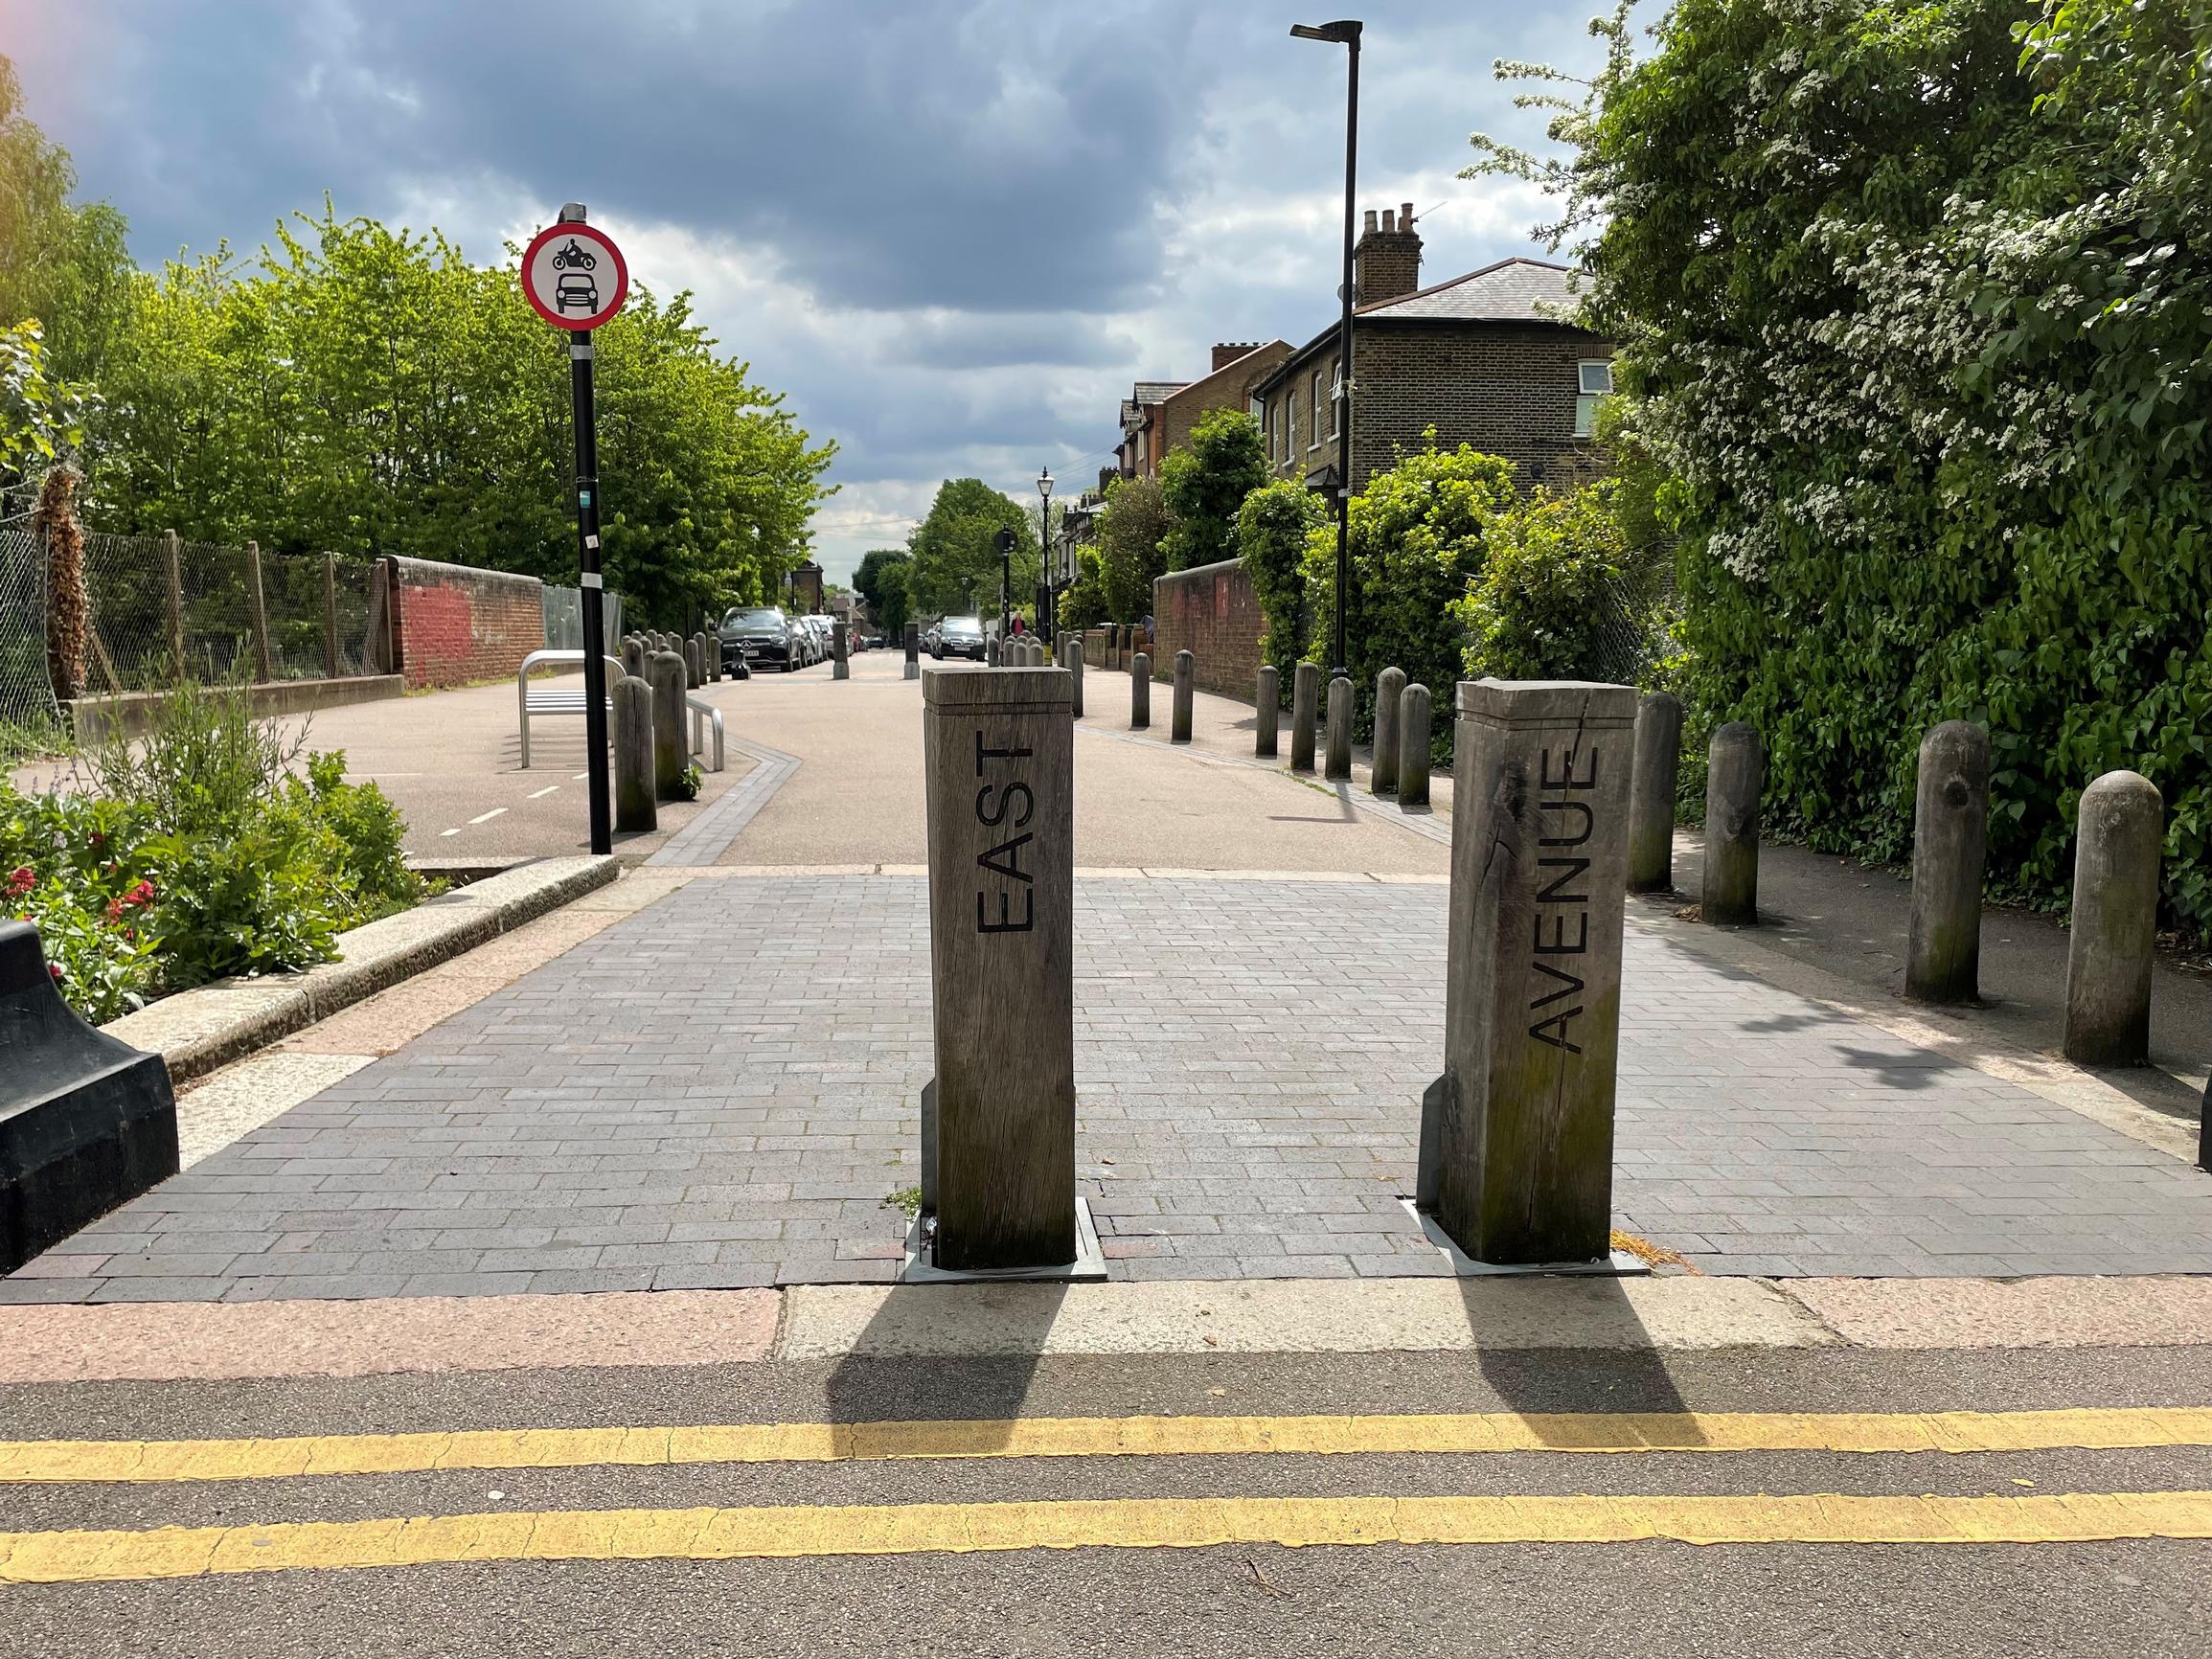 Schemes that restrict through traffic on residential streets – in effect LTNs - are not new in the capital. This scheme in Walthamstow was introduced almost 10 years ago